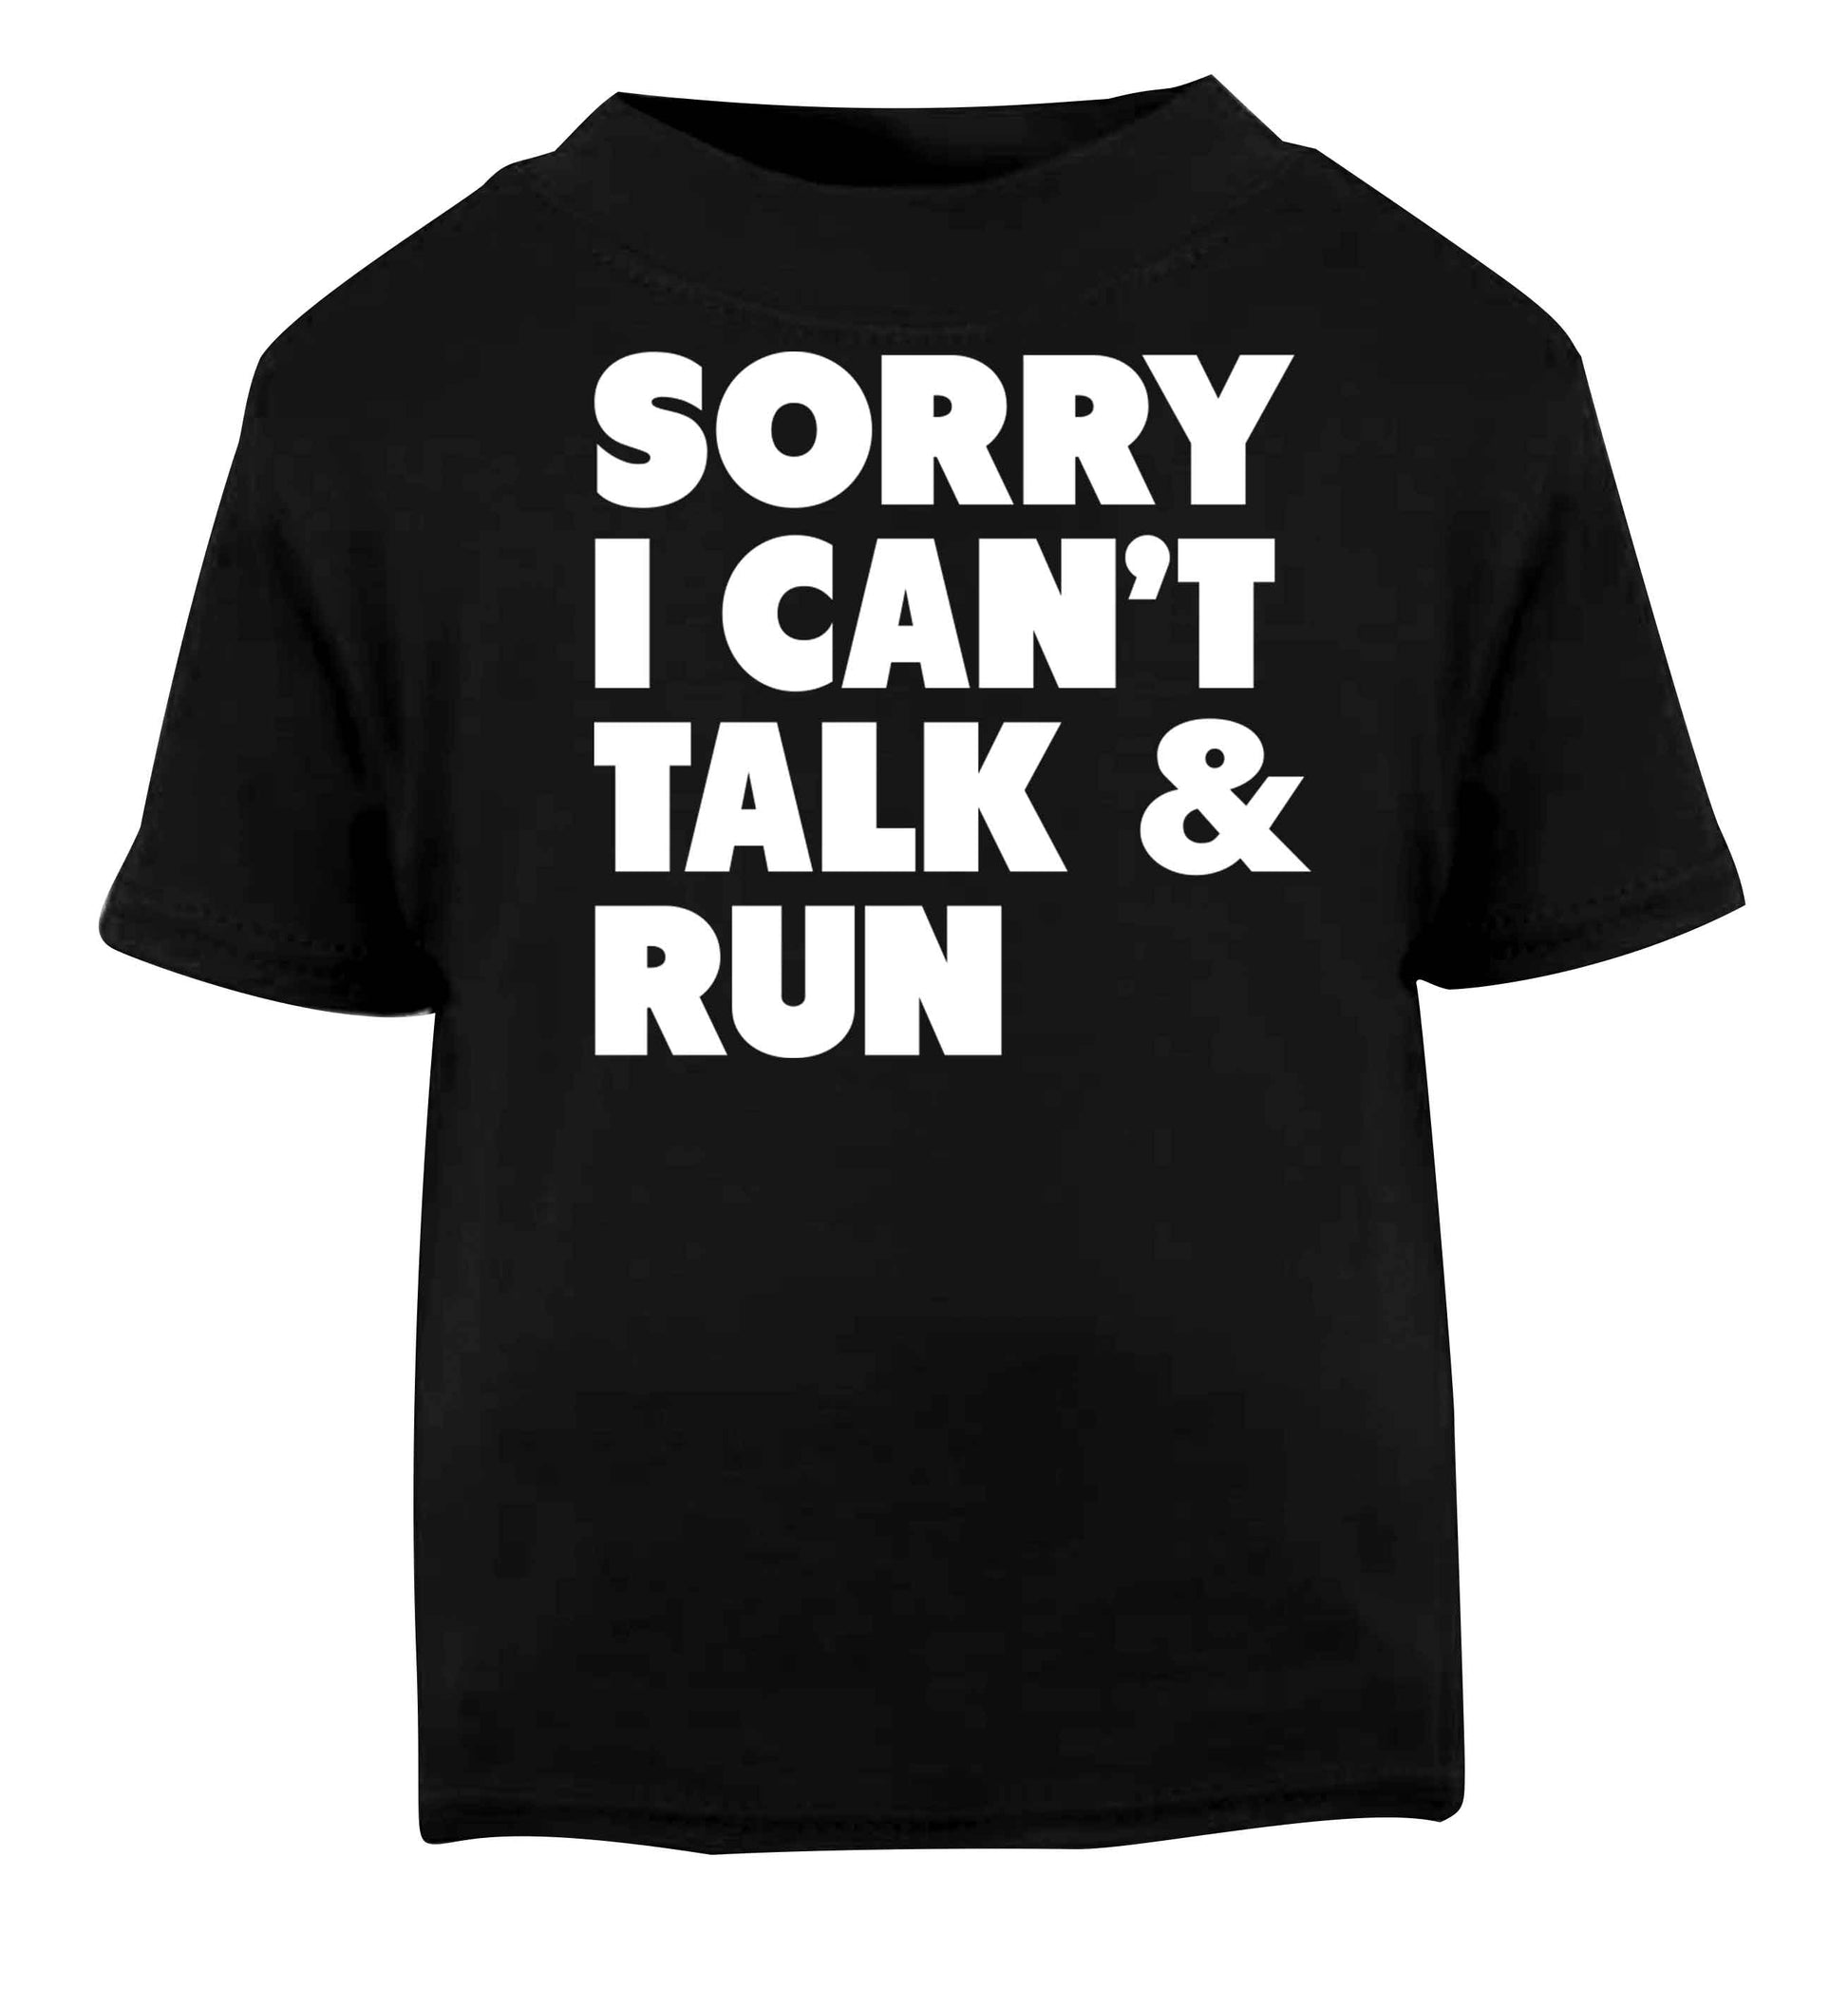 Sorry I can't talk and run Black baby toddler Tshirt 2 years